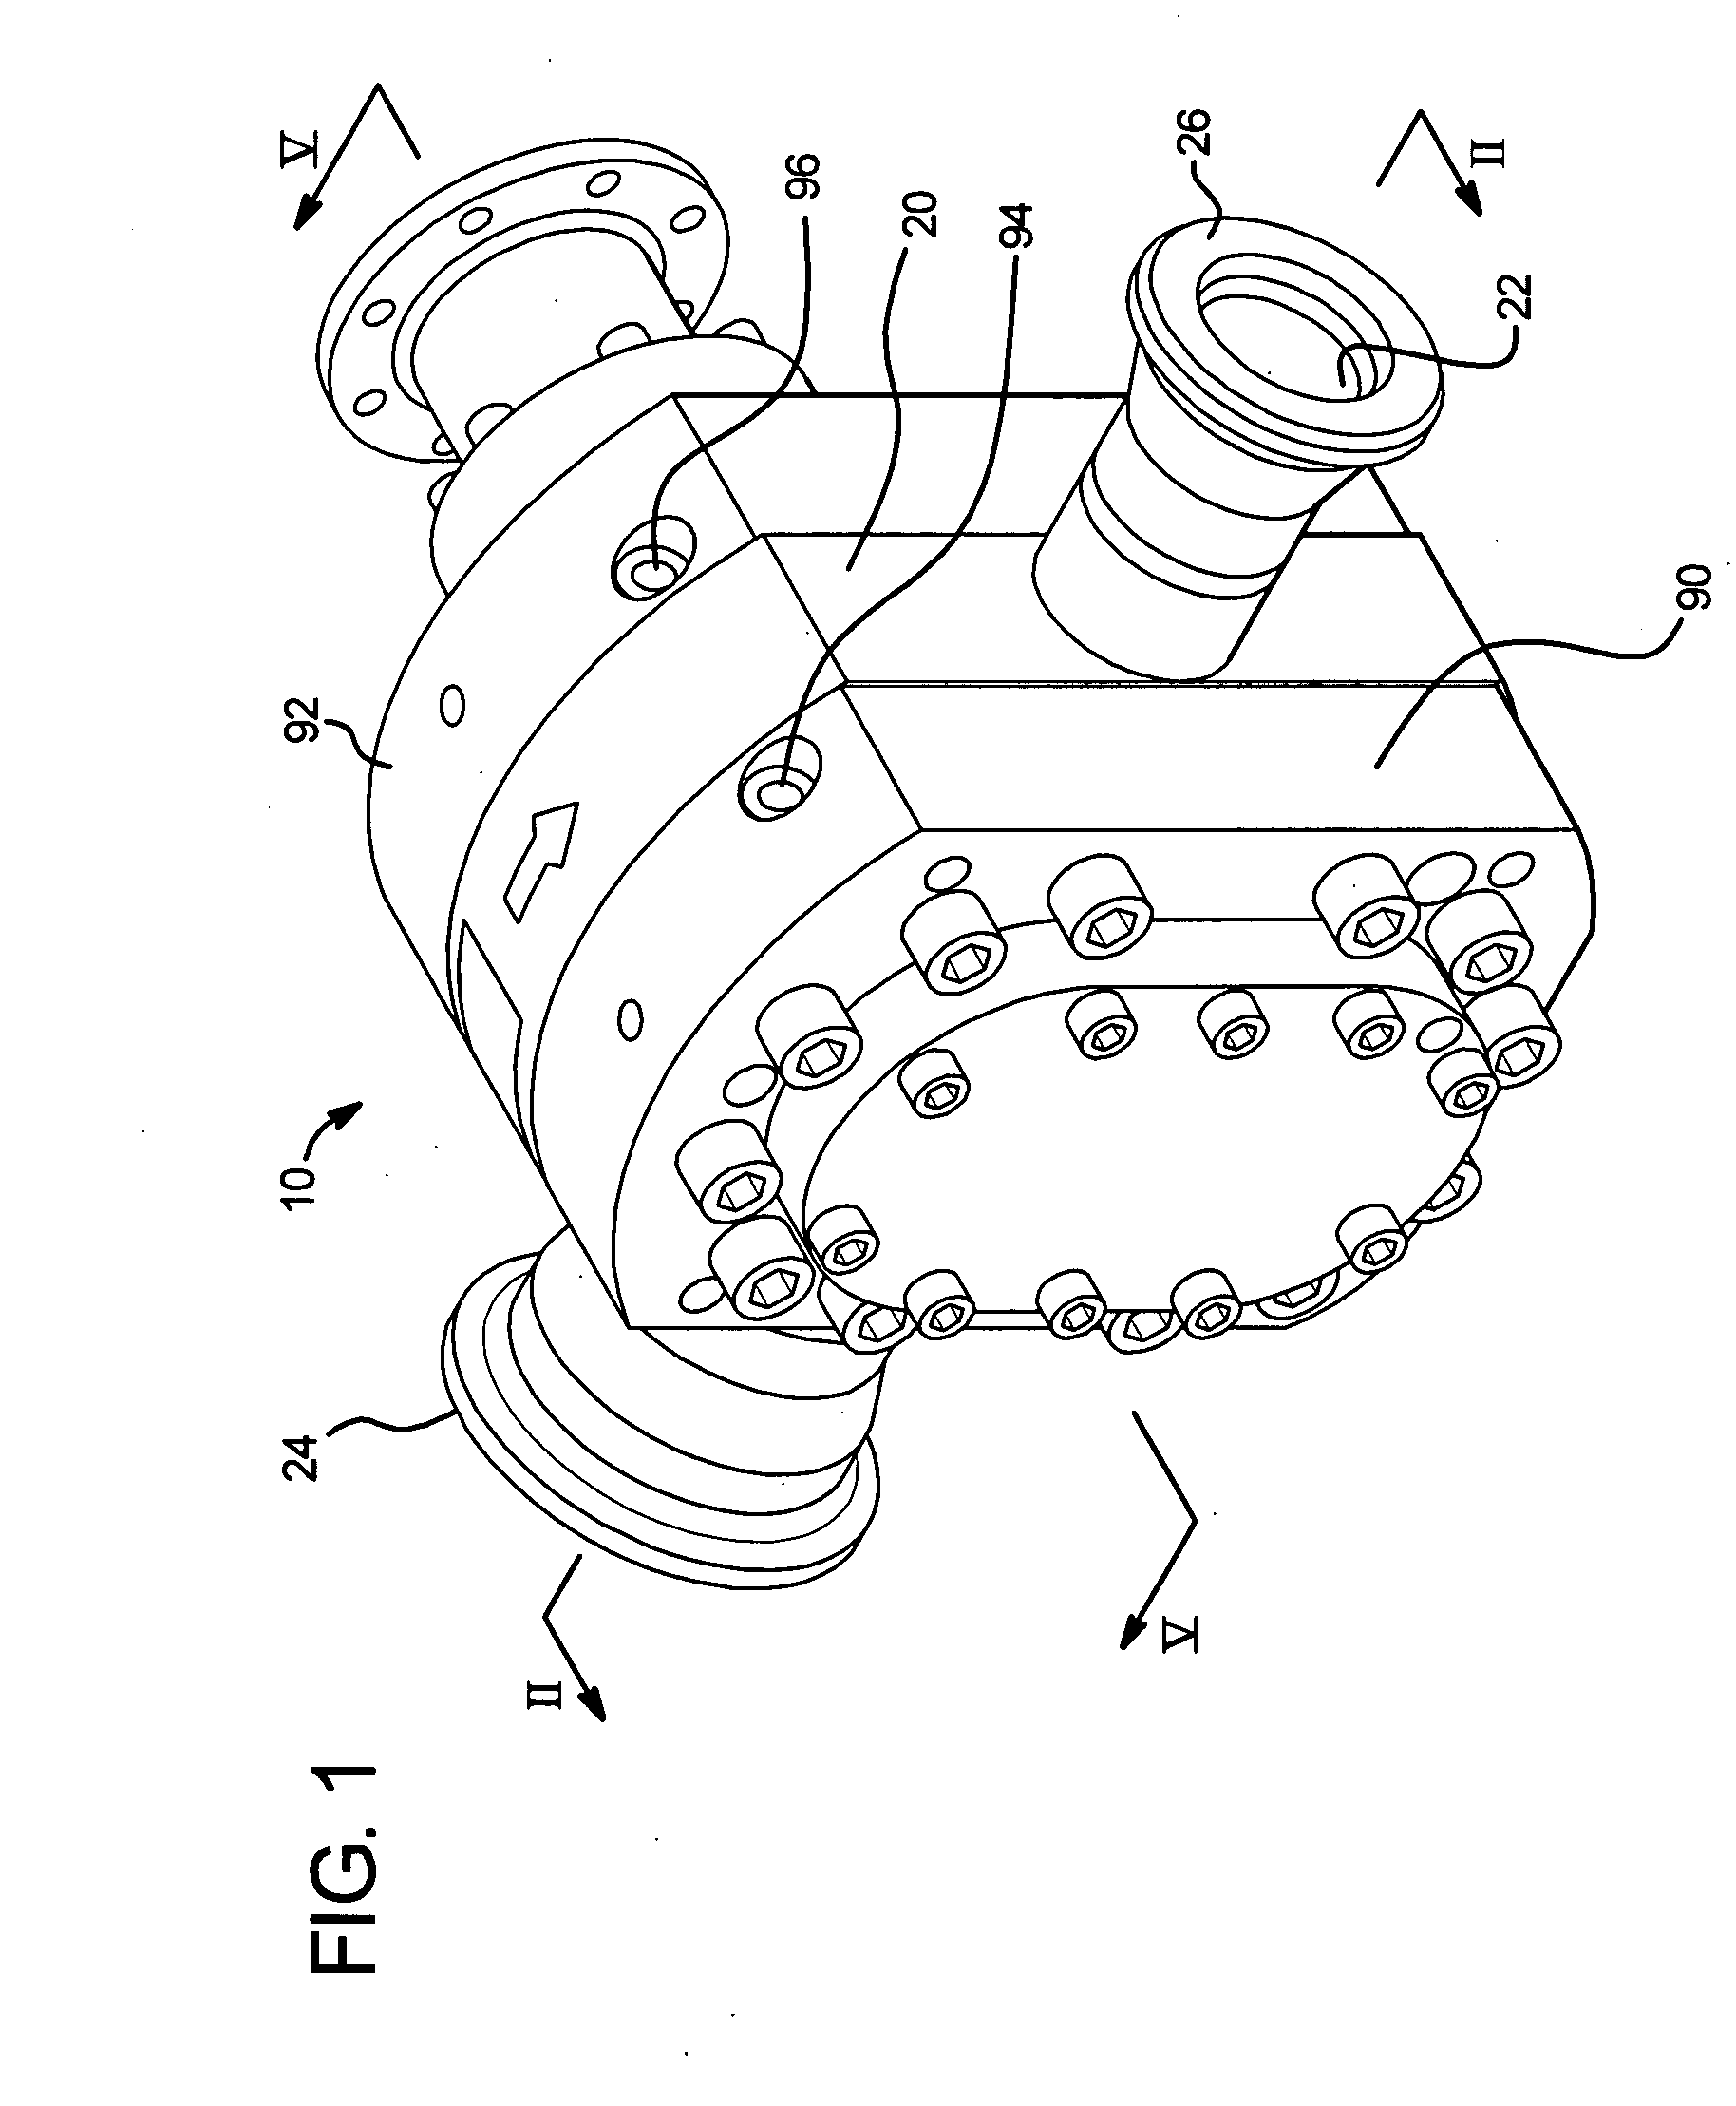 Gear pumps and methods for using gear pumps